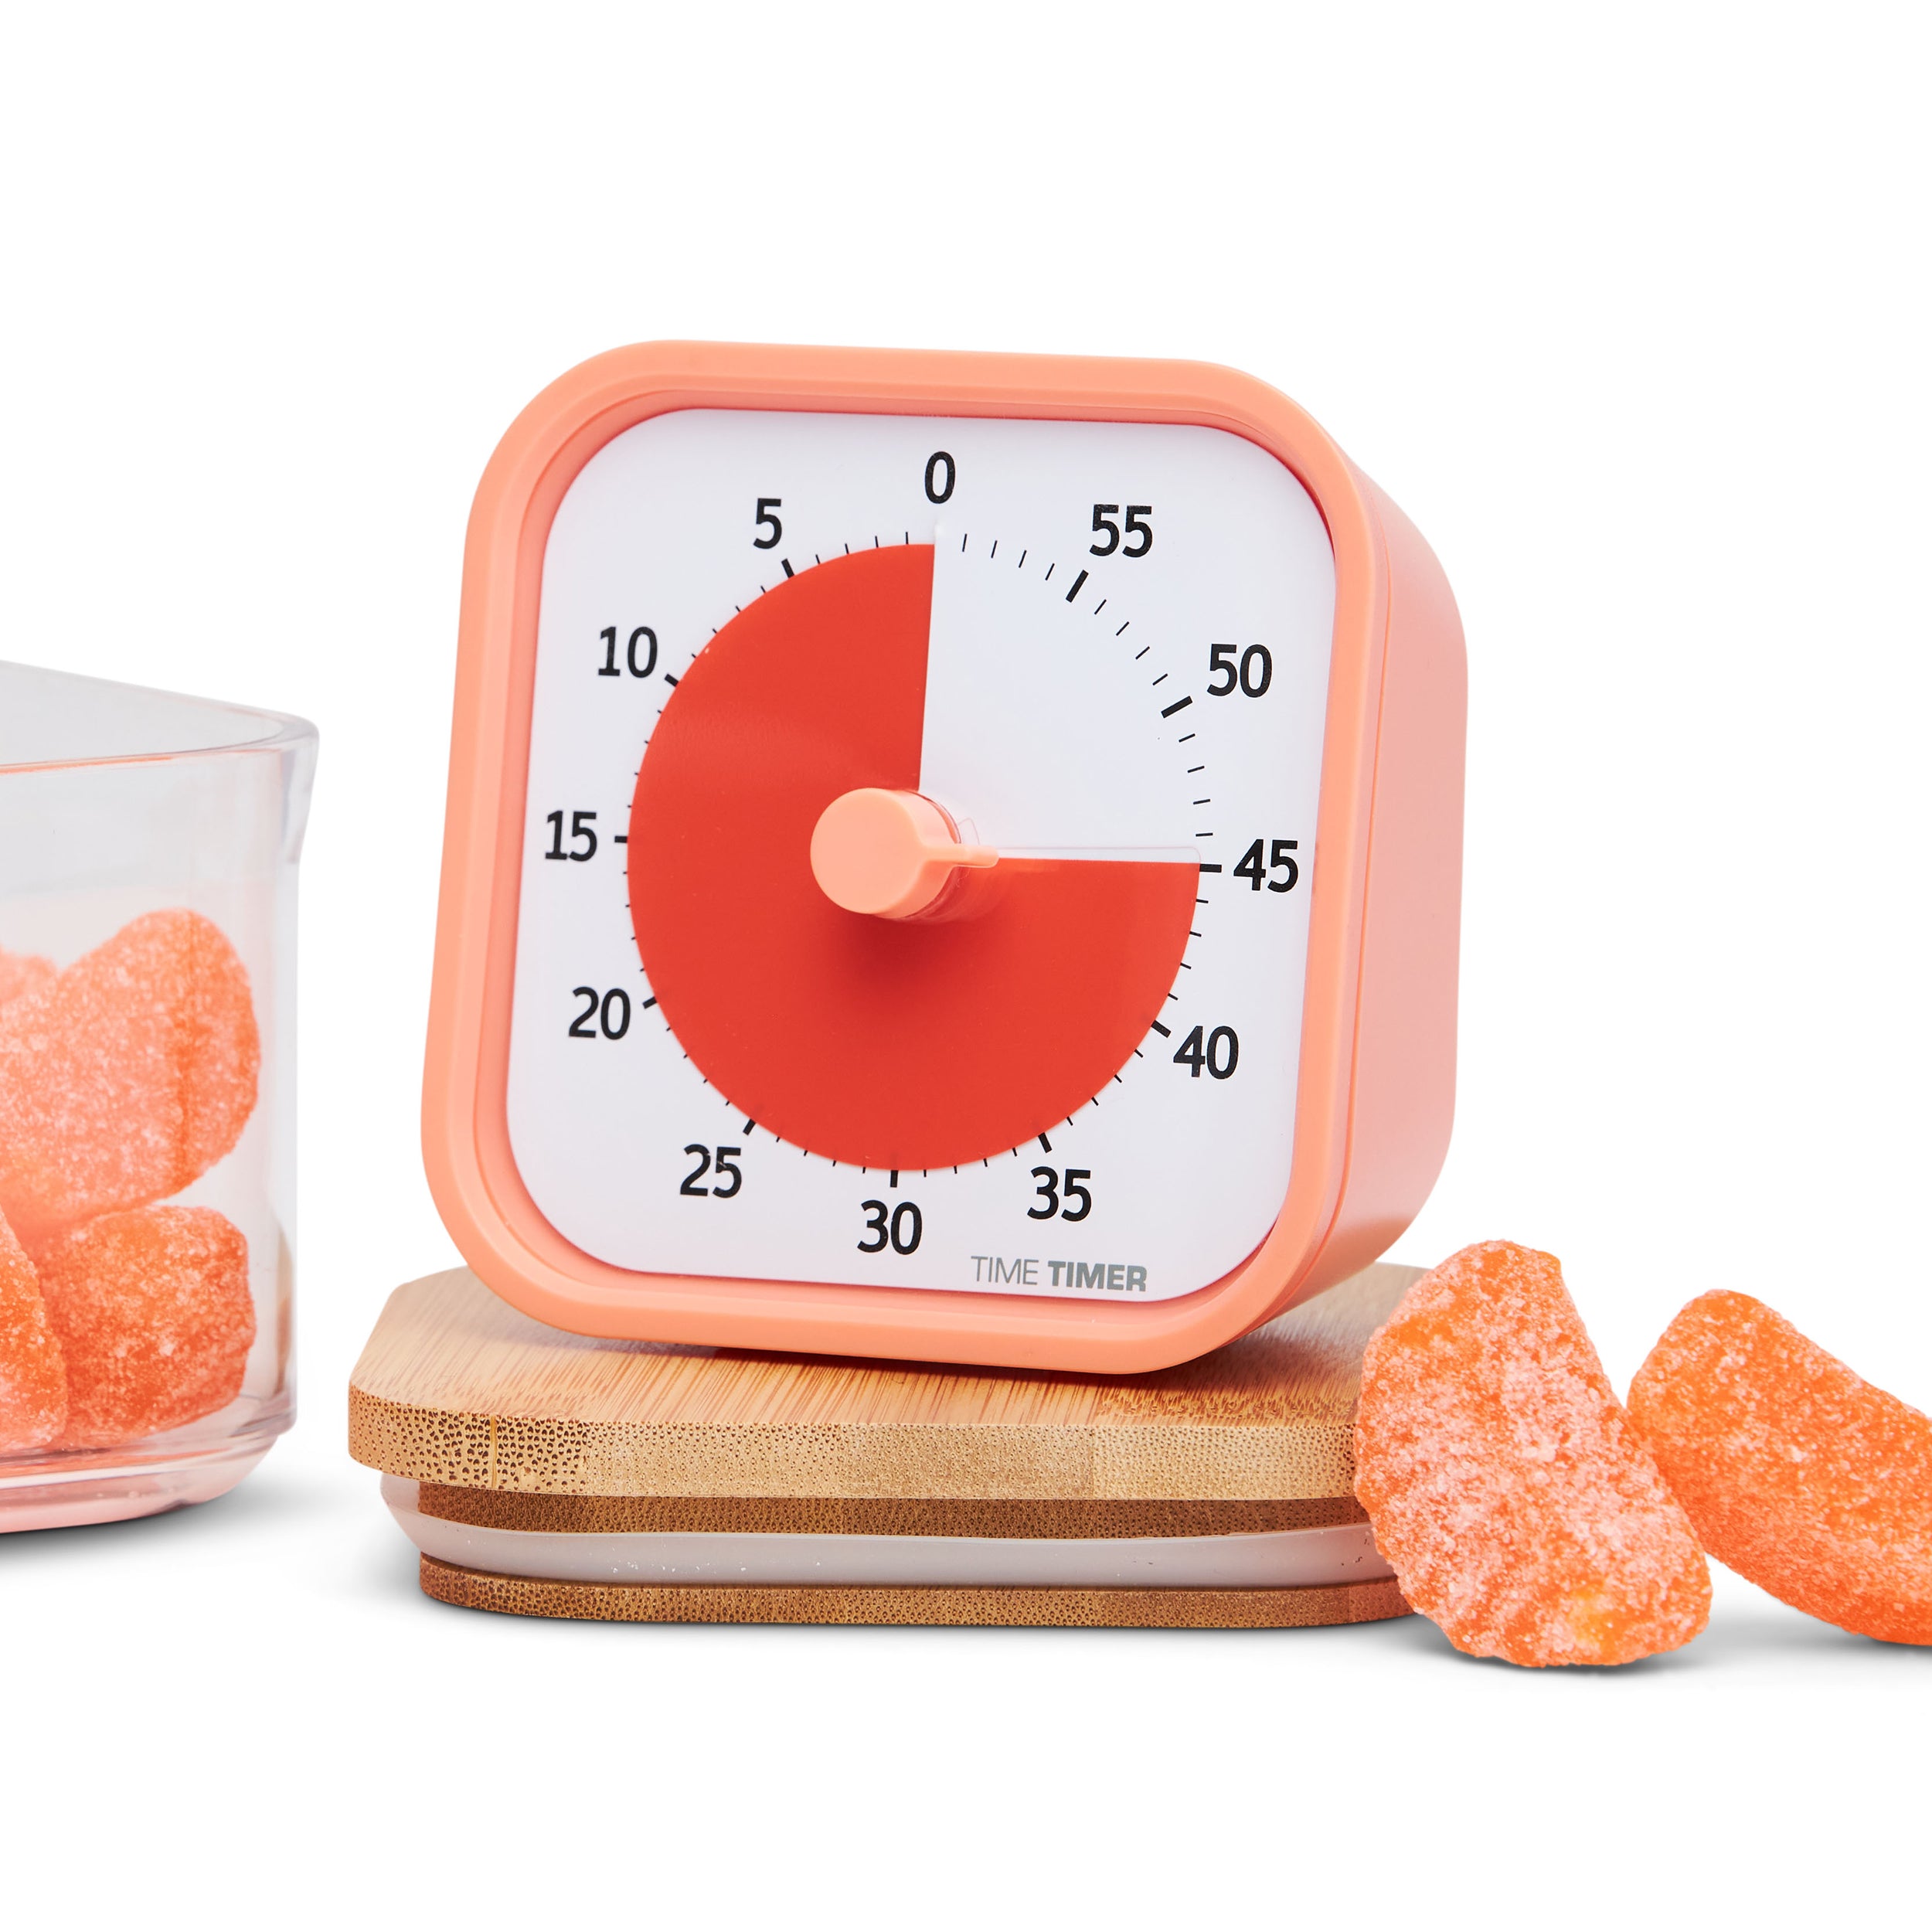 Time Timer MOD - Home Edition - visual timer. This collection of visual timers have colorful disks that disappear as time elapses. Pictured is the Dreamsicle Orange version. The outside of the timer is a sherbert colored orange while the inside is a more saturated bright orange. The timer is surrounded by orange slice candies.  